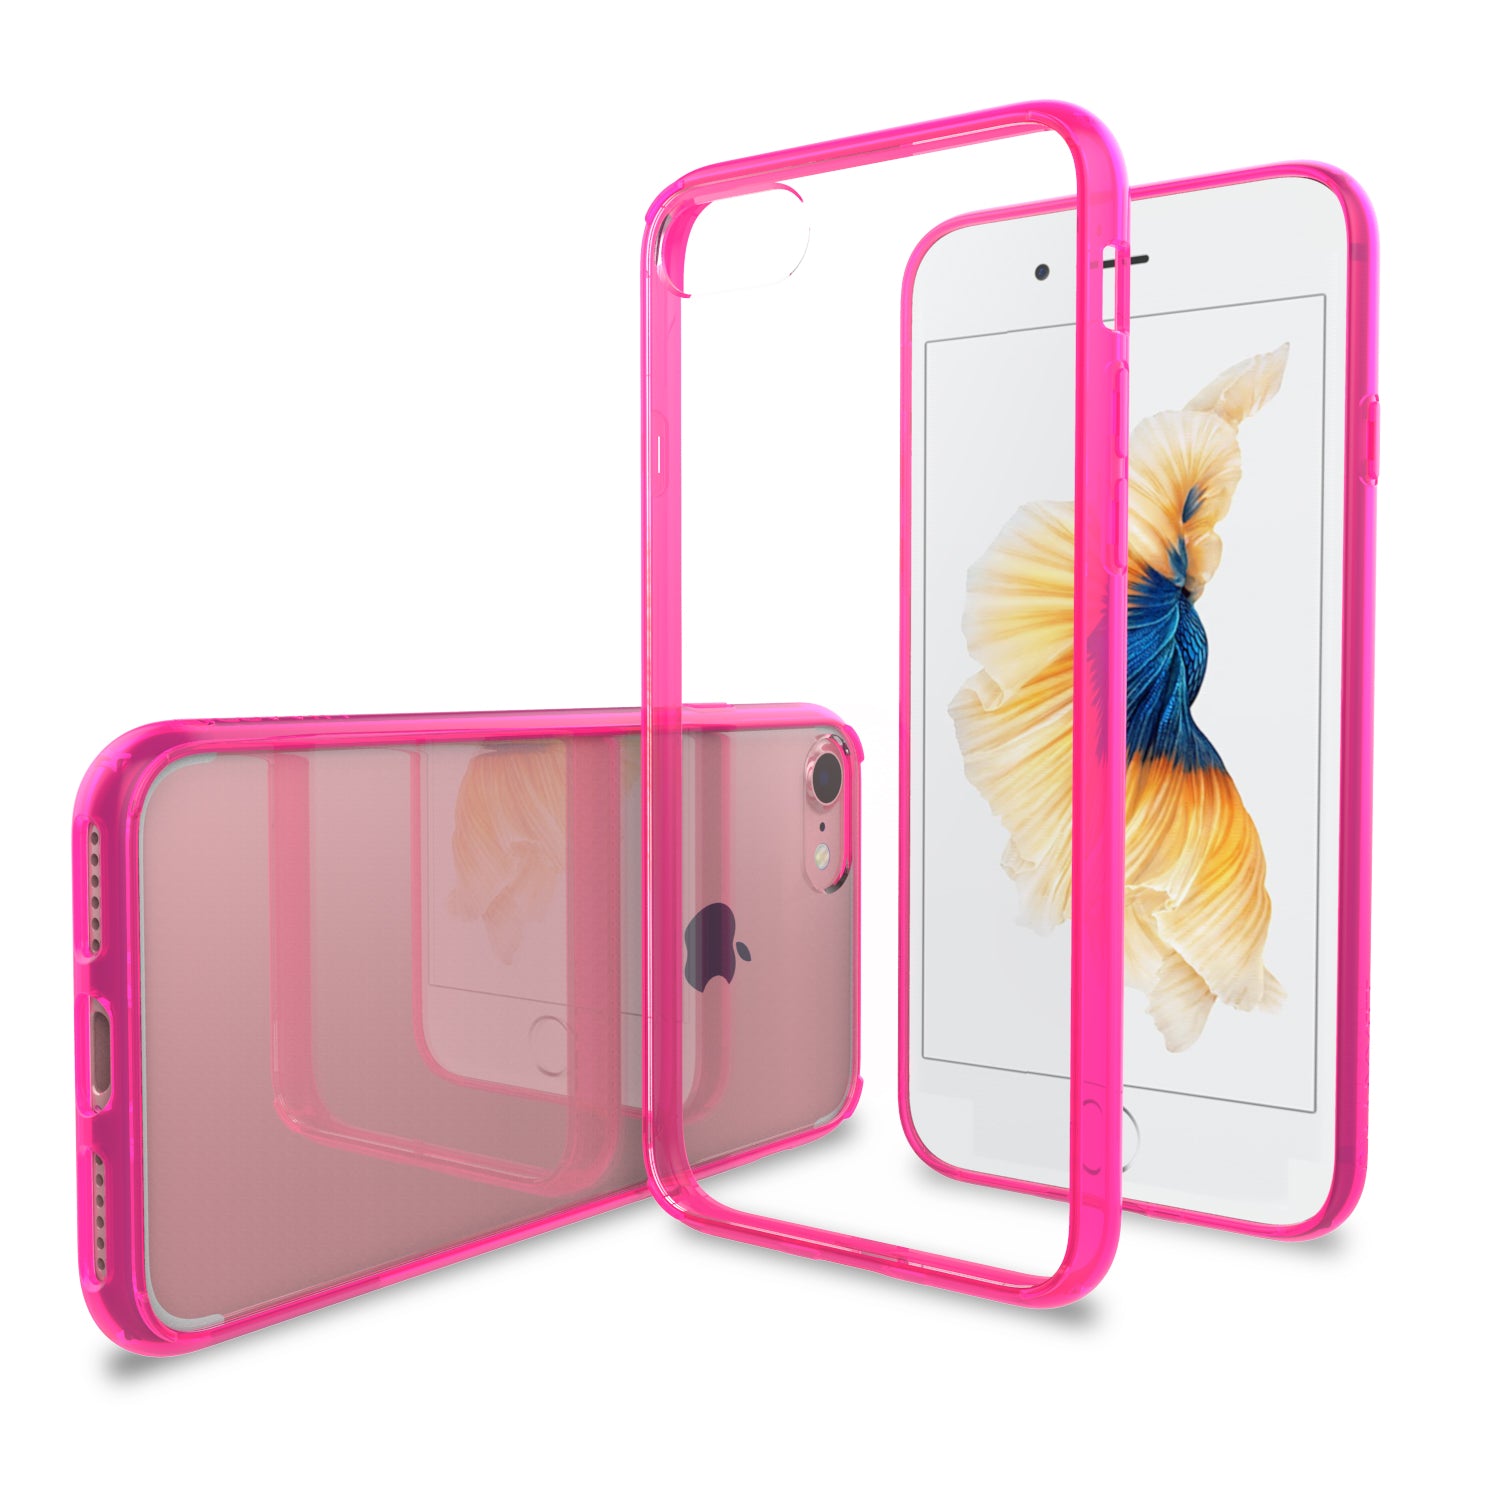 Luvvitt Clear View Hybrid Case for Apple iPhone SE 2020 and iPhone 7 and 8 - Pink